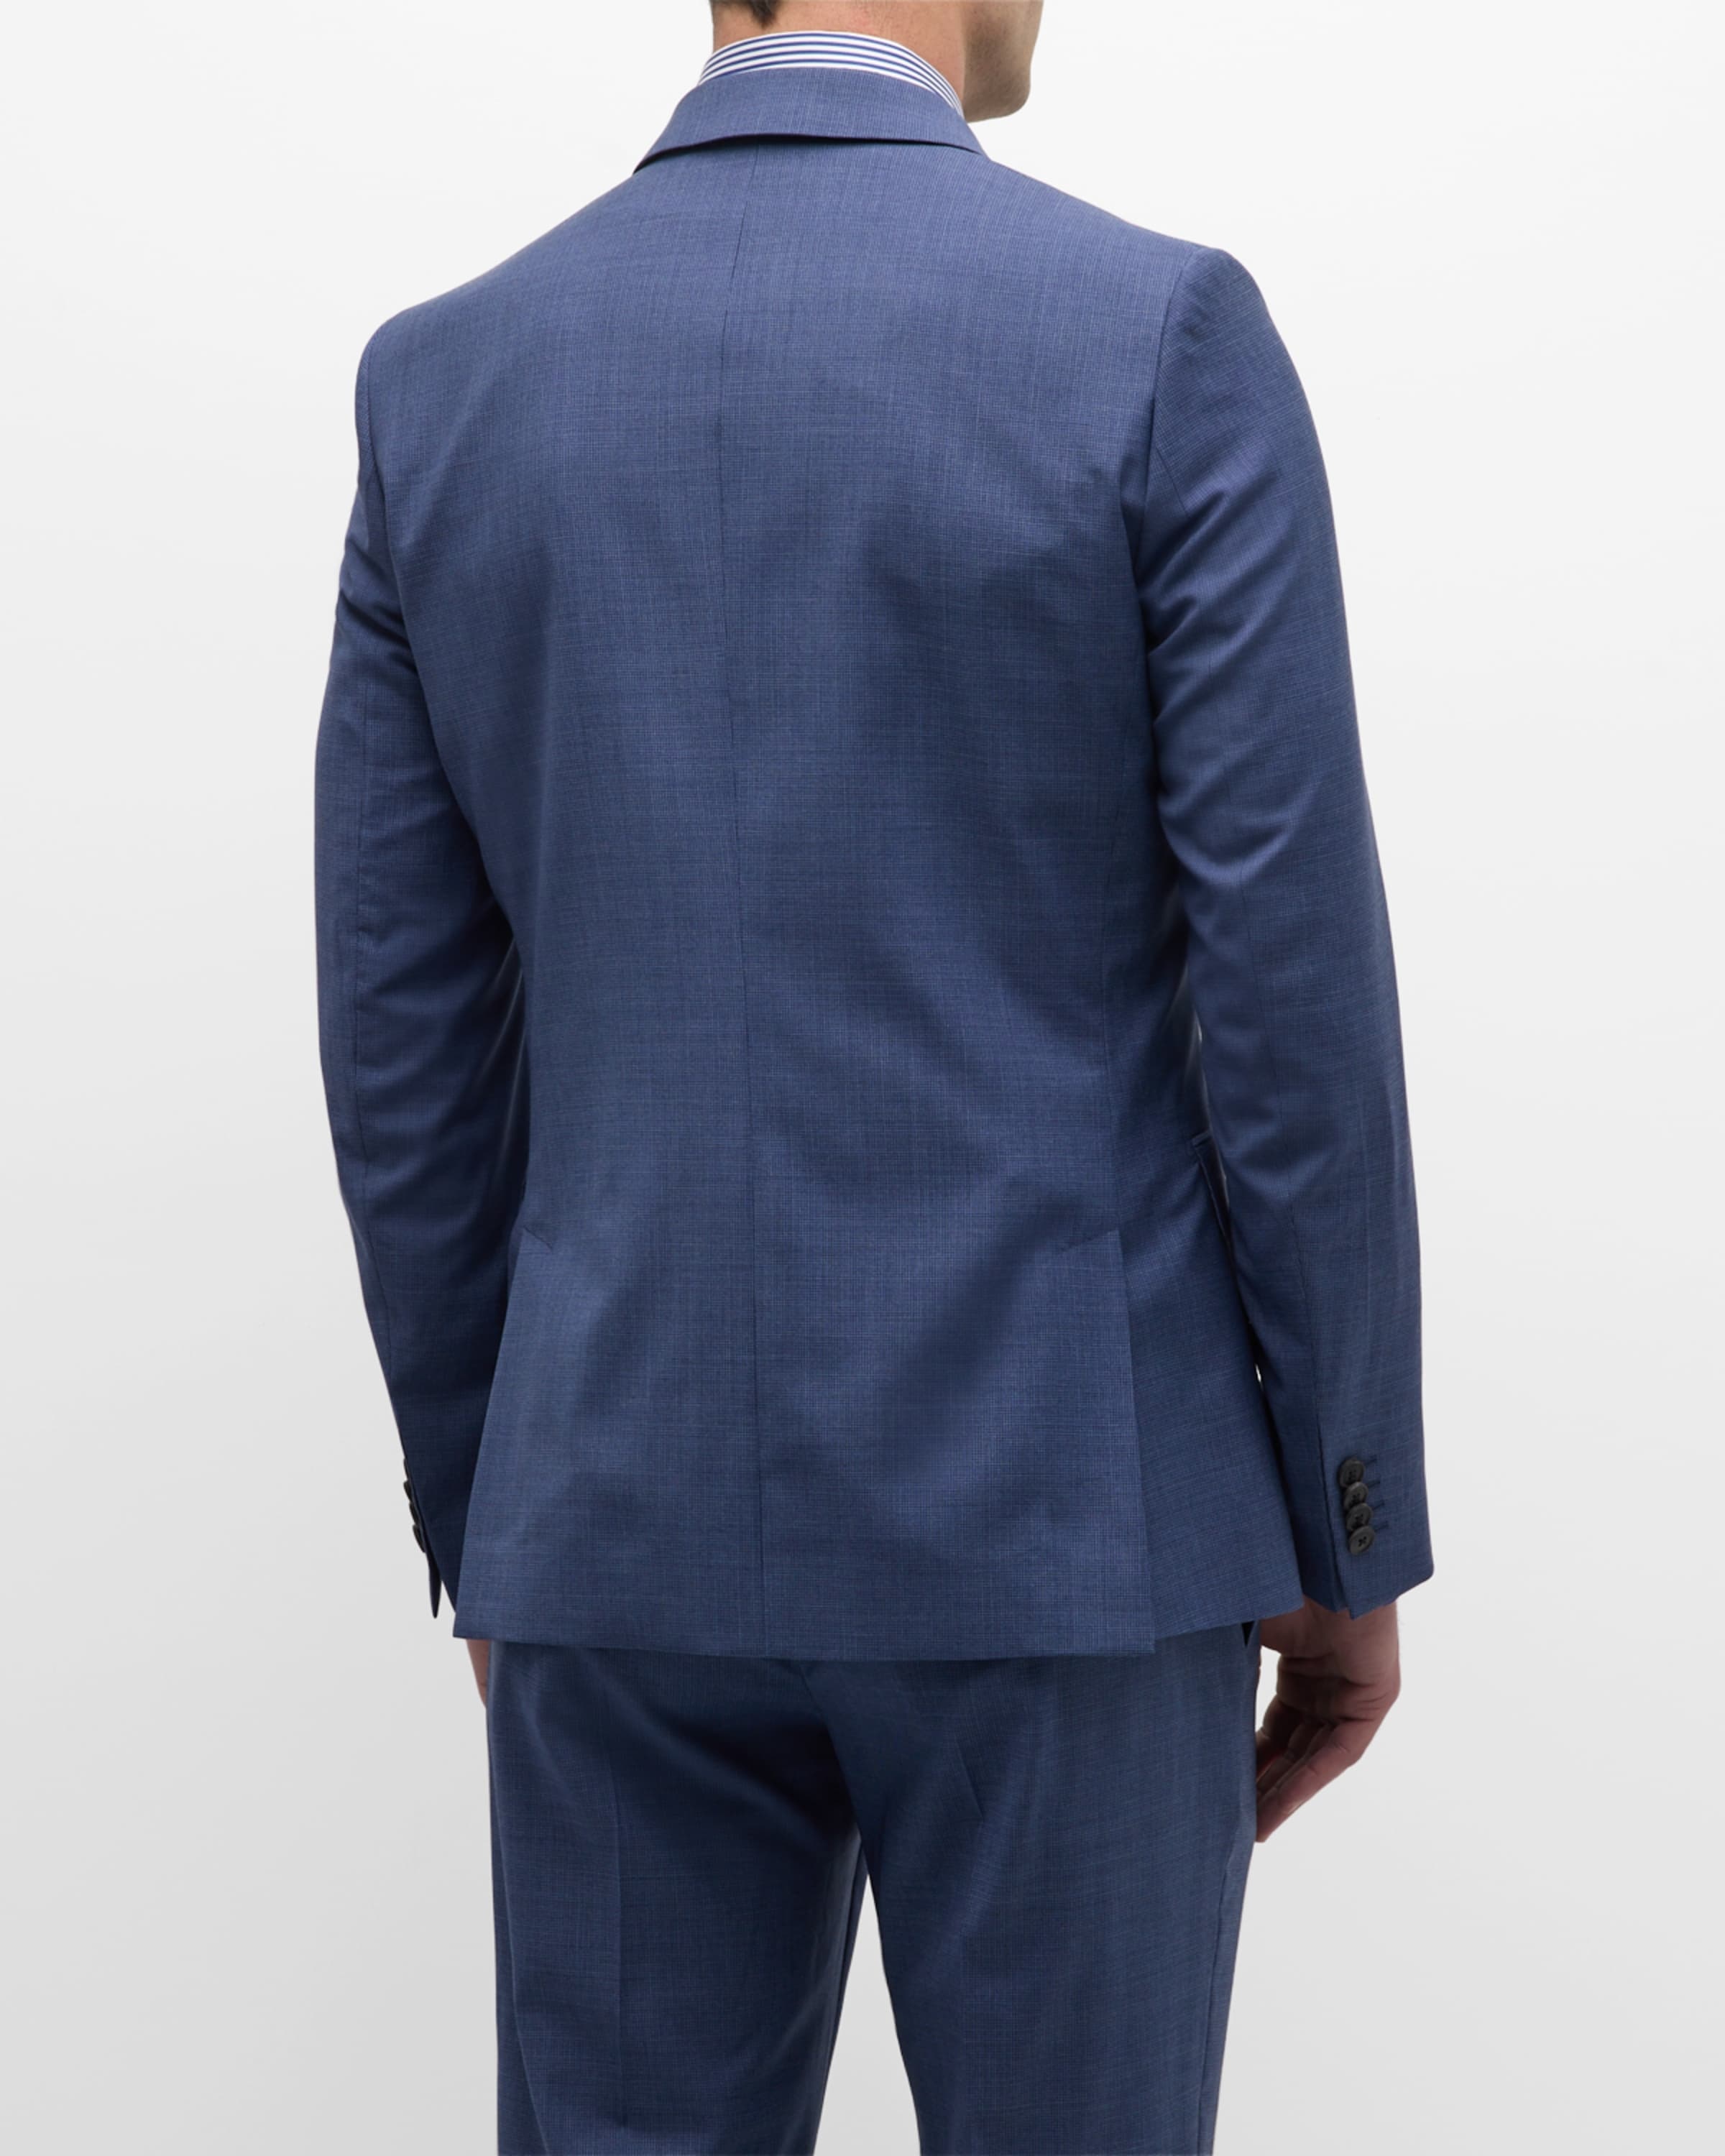 Men's Soho Fit Micro-Houndstooth Suit - 5